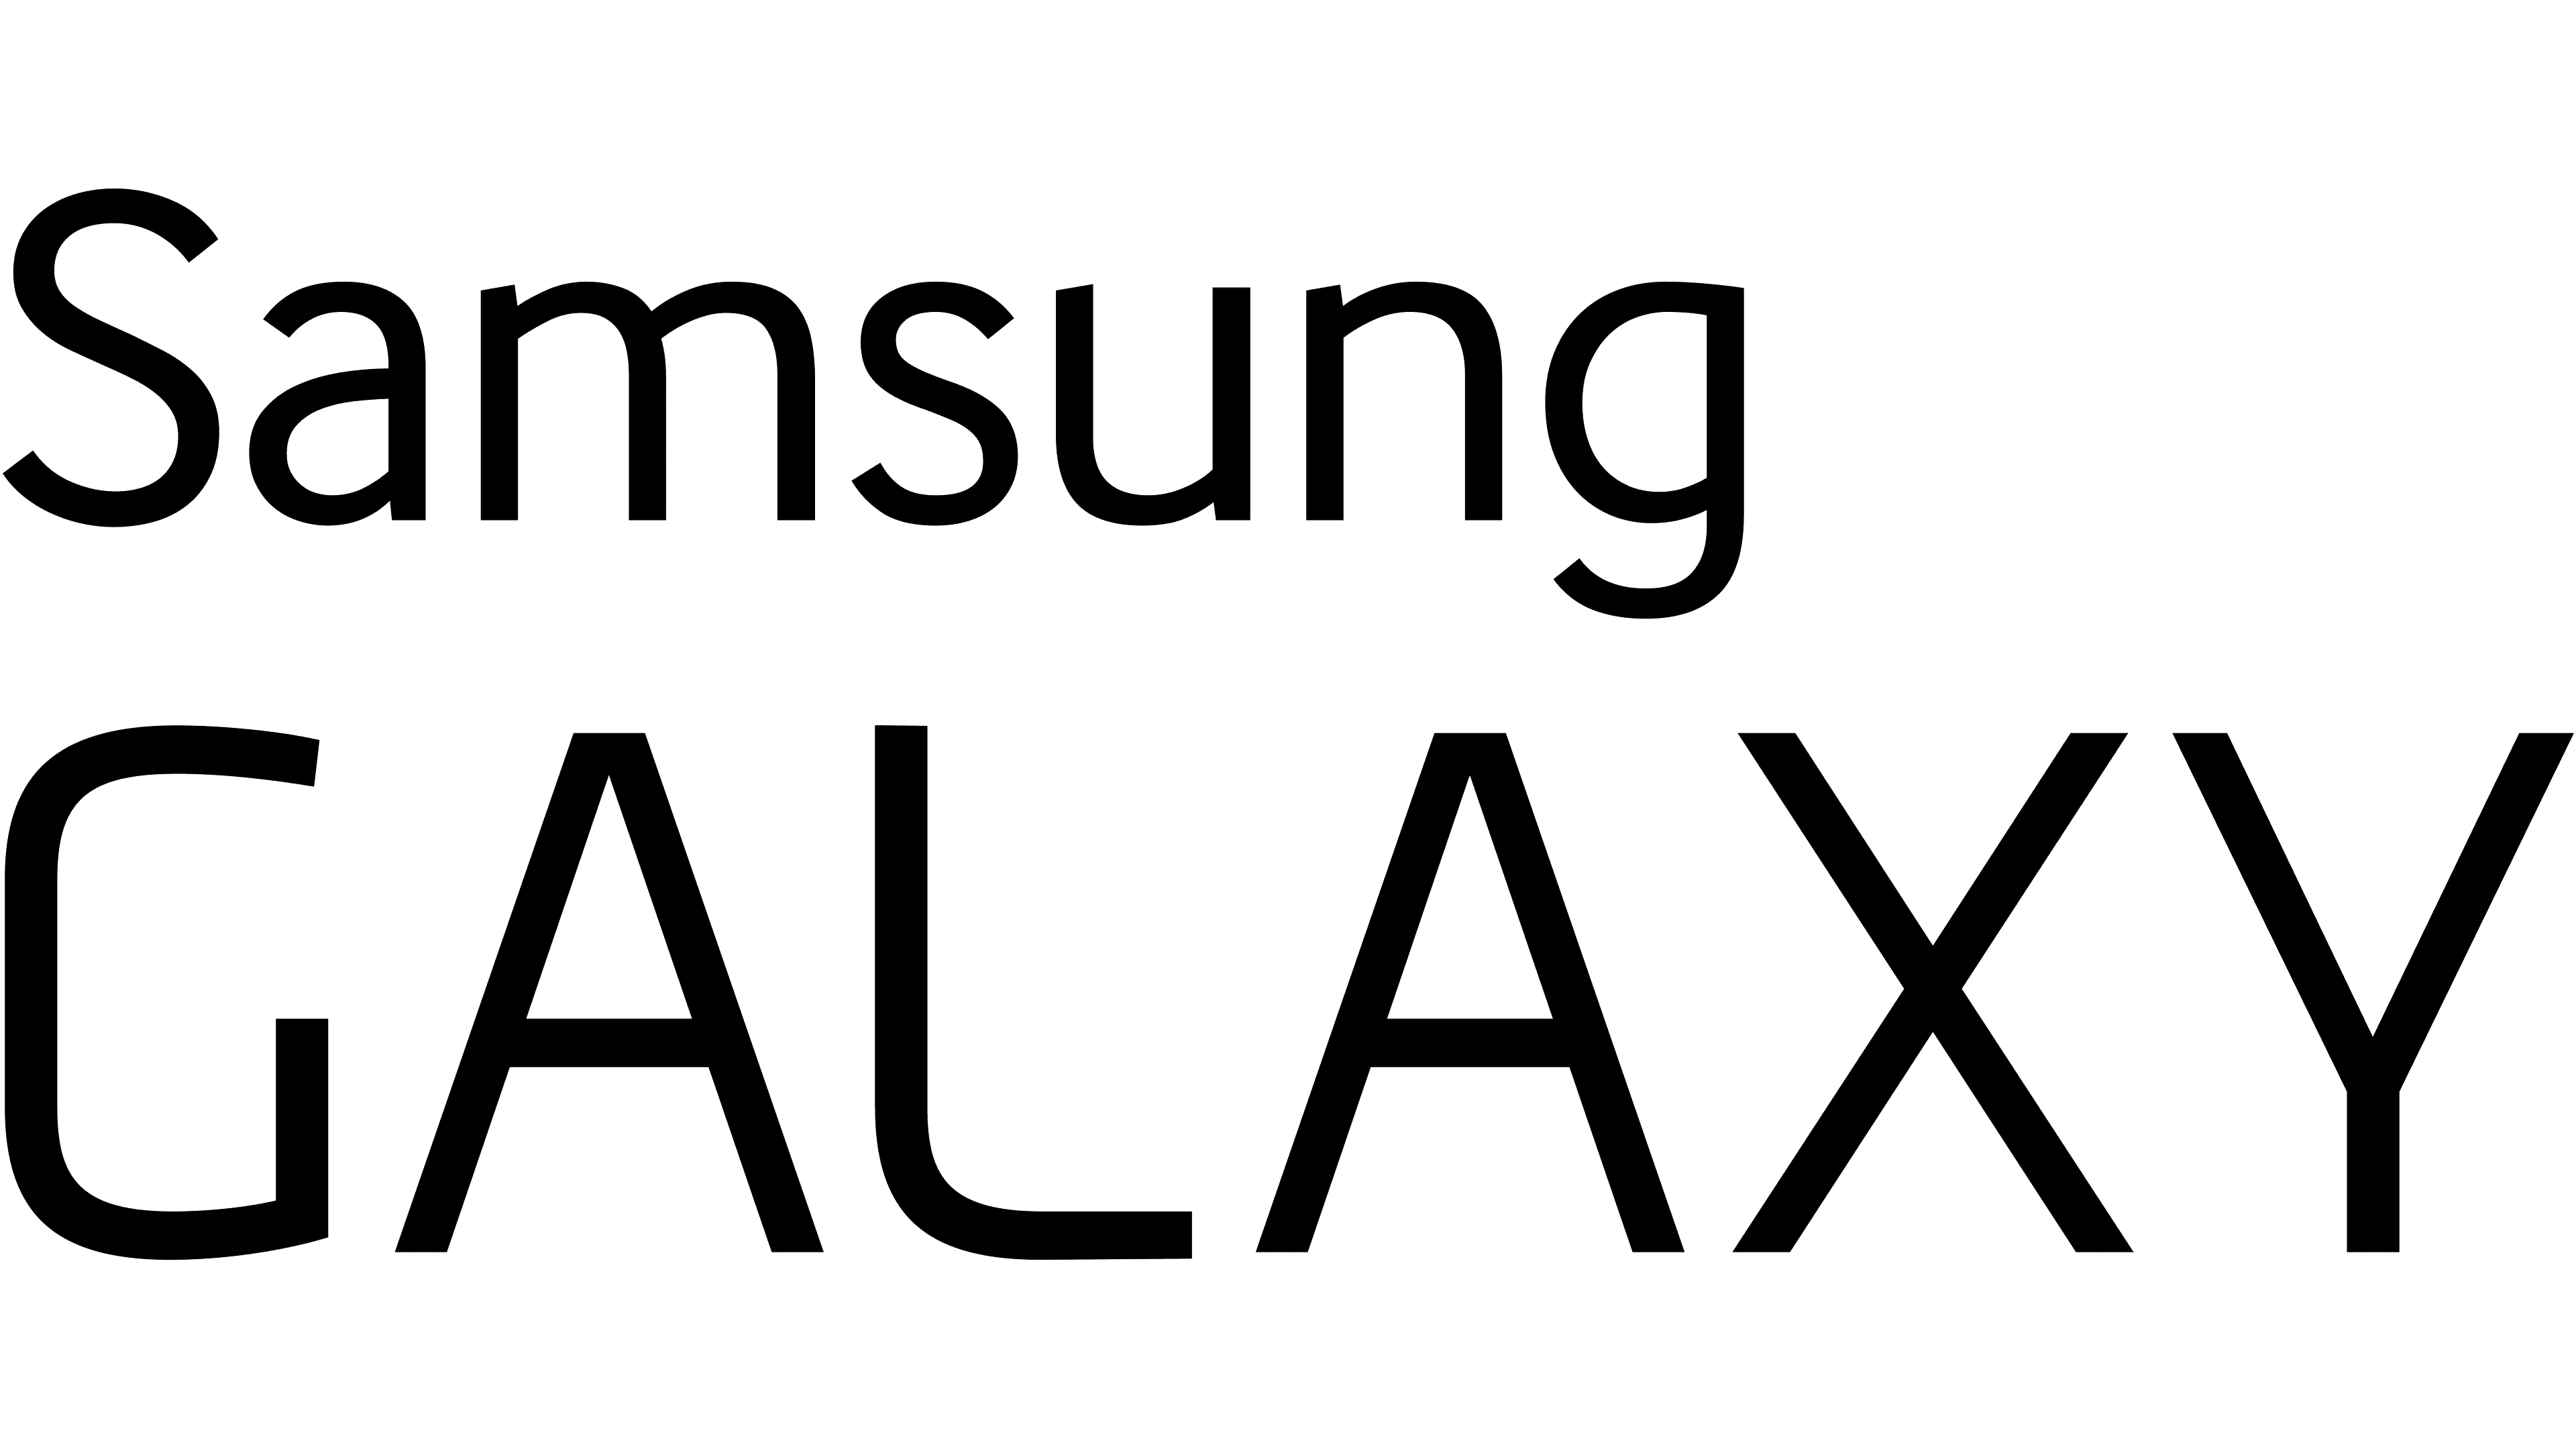 Samsung Logo Balls – Samsung Samsung Logo Balls but it's a Simple Piano  Composition Sheet music for Piano (Solo) Easy | Musescore.com